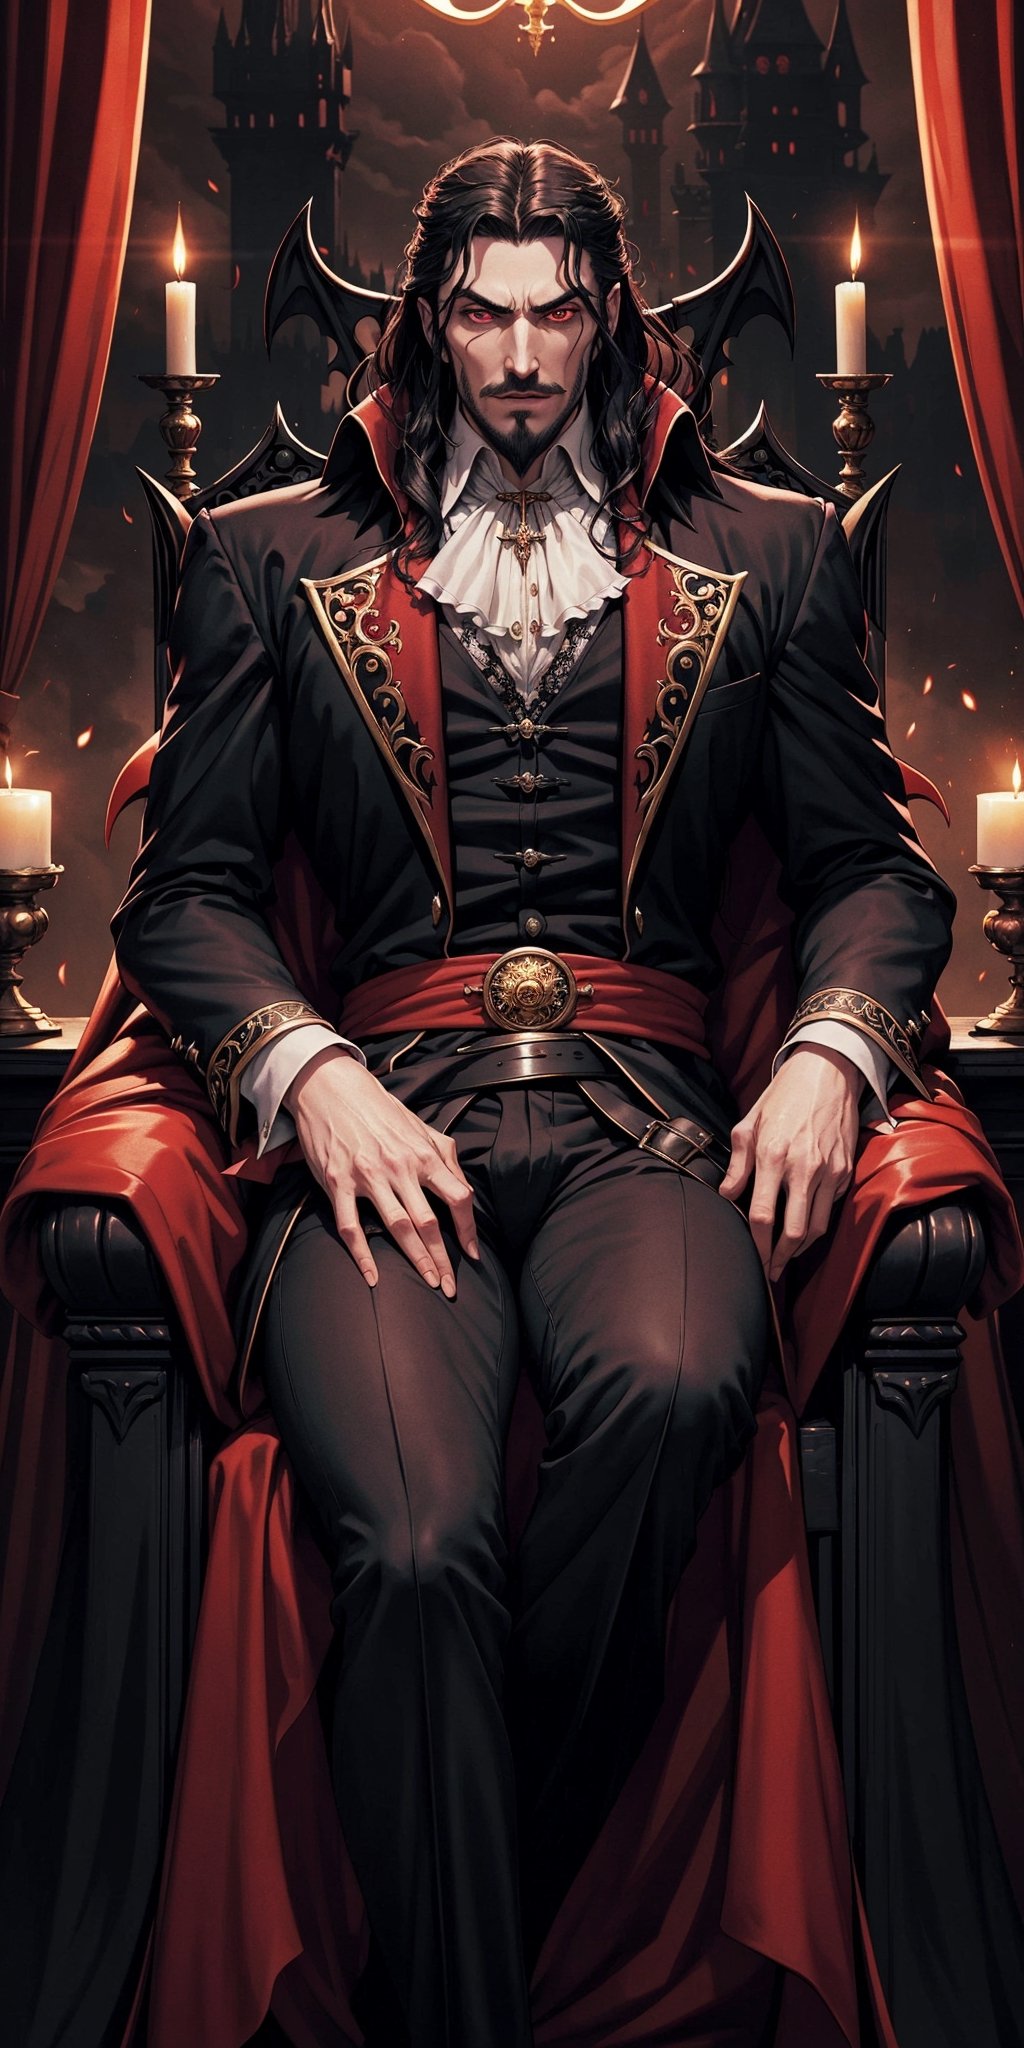 masterpiece,best quality,ultra-detailed,High detailed,picture-perfect face,man,manly,black hair,short beard,confident,arrogant,long hair,curly hair,red glowing eyes,fangs,dracula,castlevania,konami,infront of gothic castle,red and black vamiper attire,ornate and intricate,gold trim,belt,epic pose,fantasy,town,draculacastlevania
on his gothic throne,